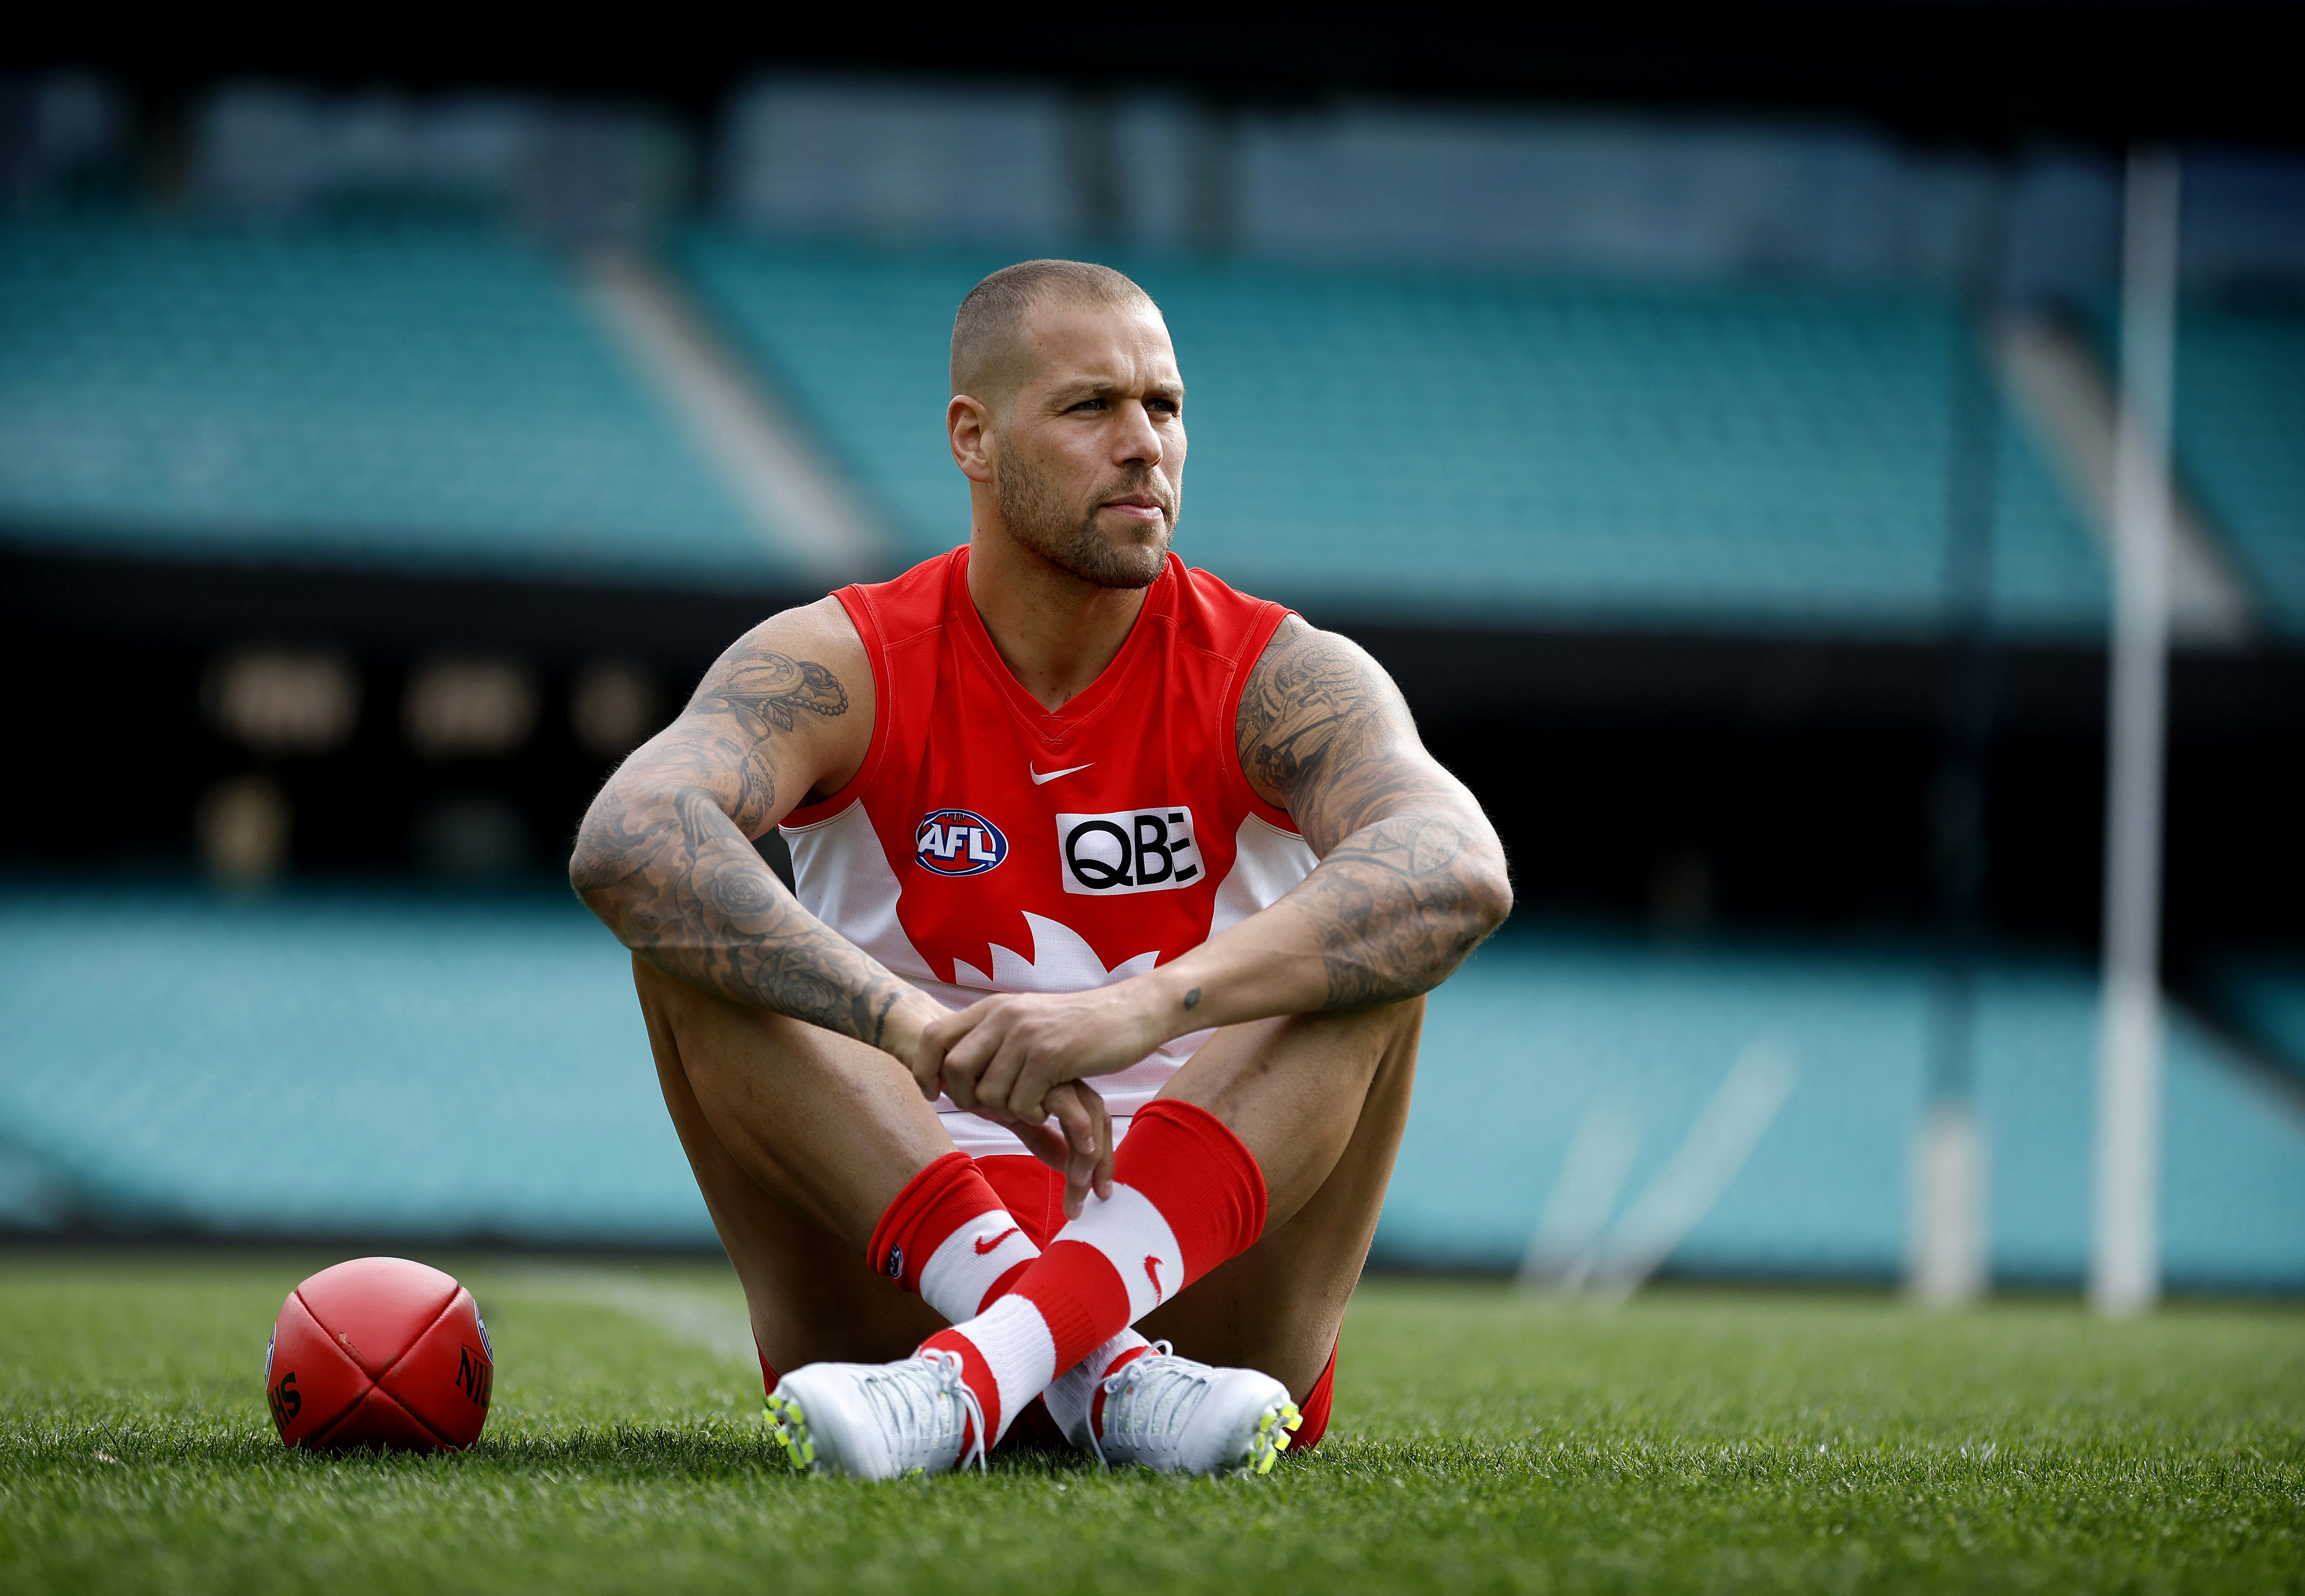 Portrait of Sydney Swans star Lance Franklin at the SCG on September 19, 2022 ahead of this weeks AFL Grand Final against Geelong at the MCG. Photo by Phil Hillyard